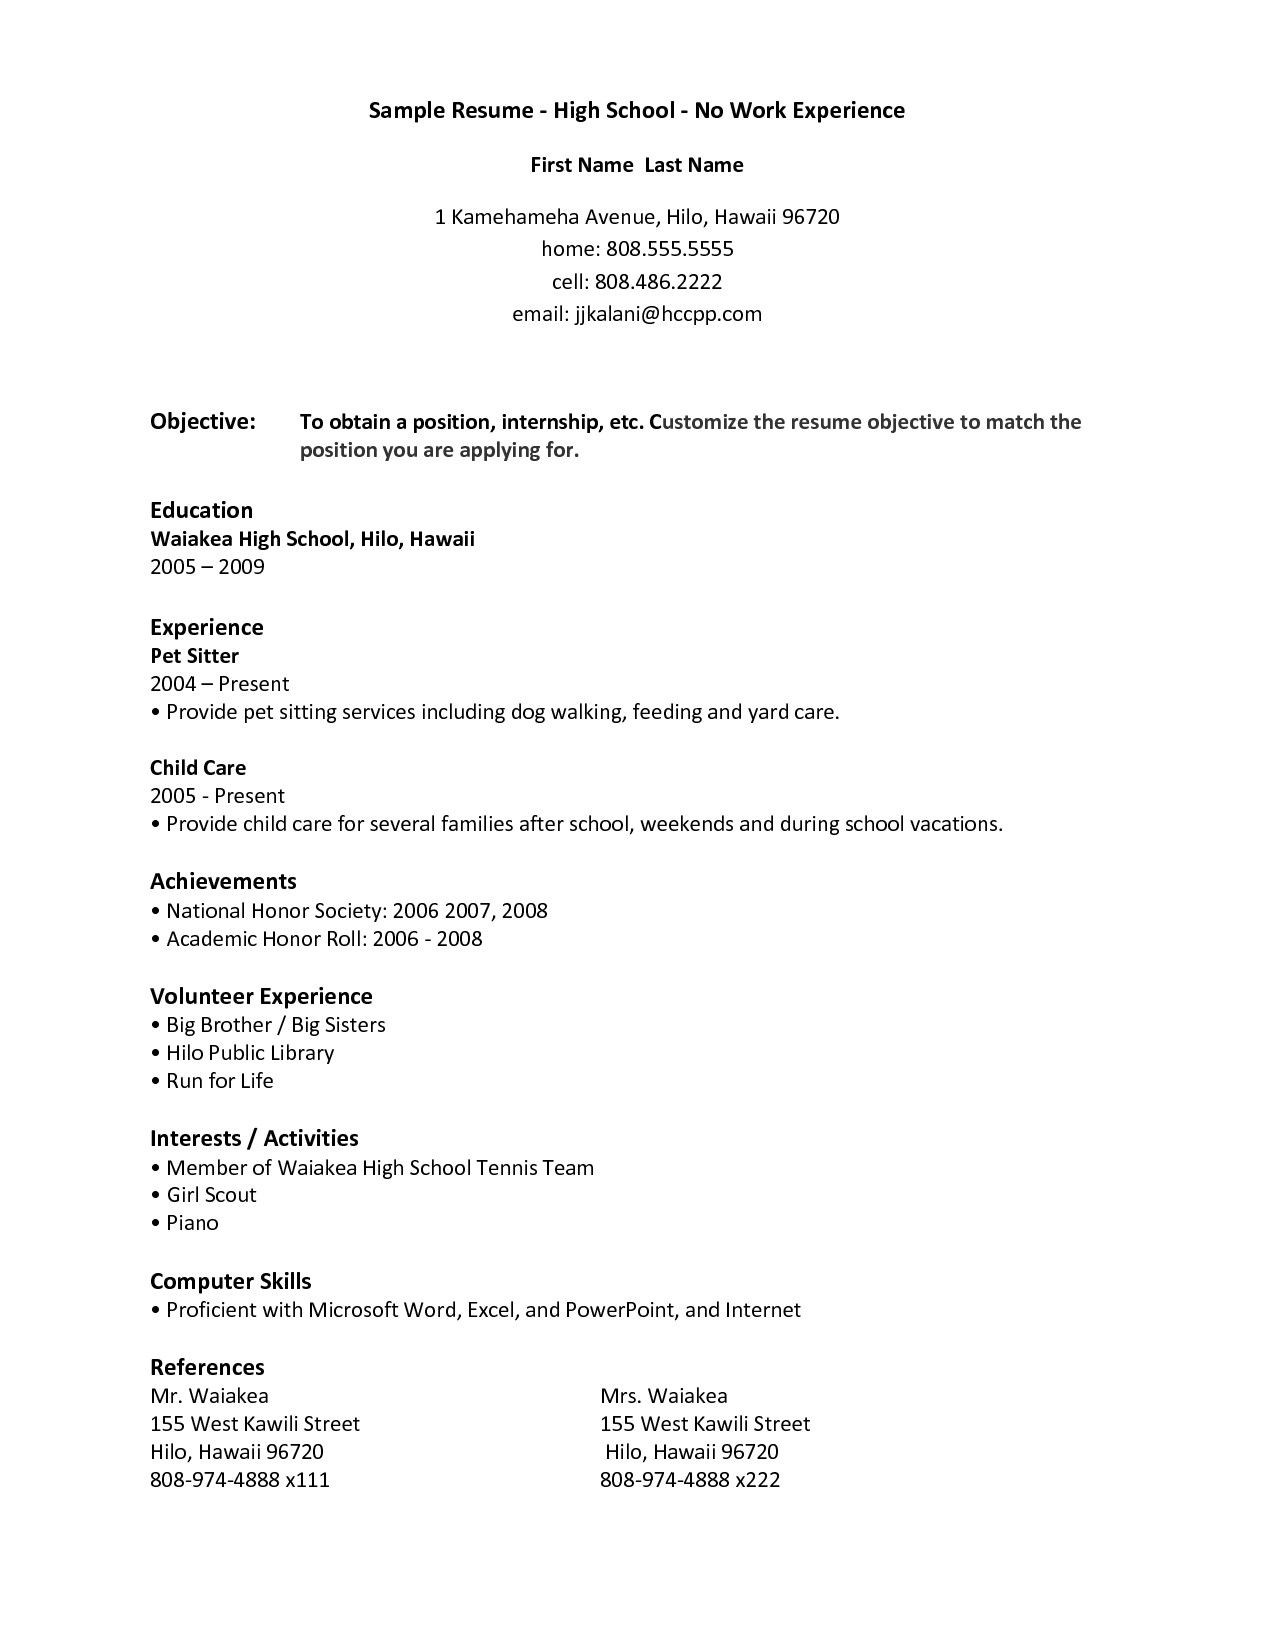 Sample Resume with Little Job Experience Free Resume Templates No Work Experience #experience …